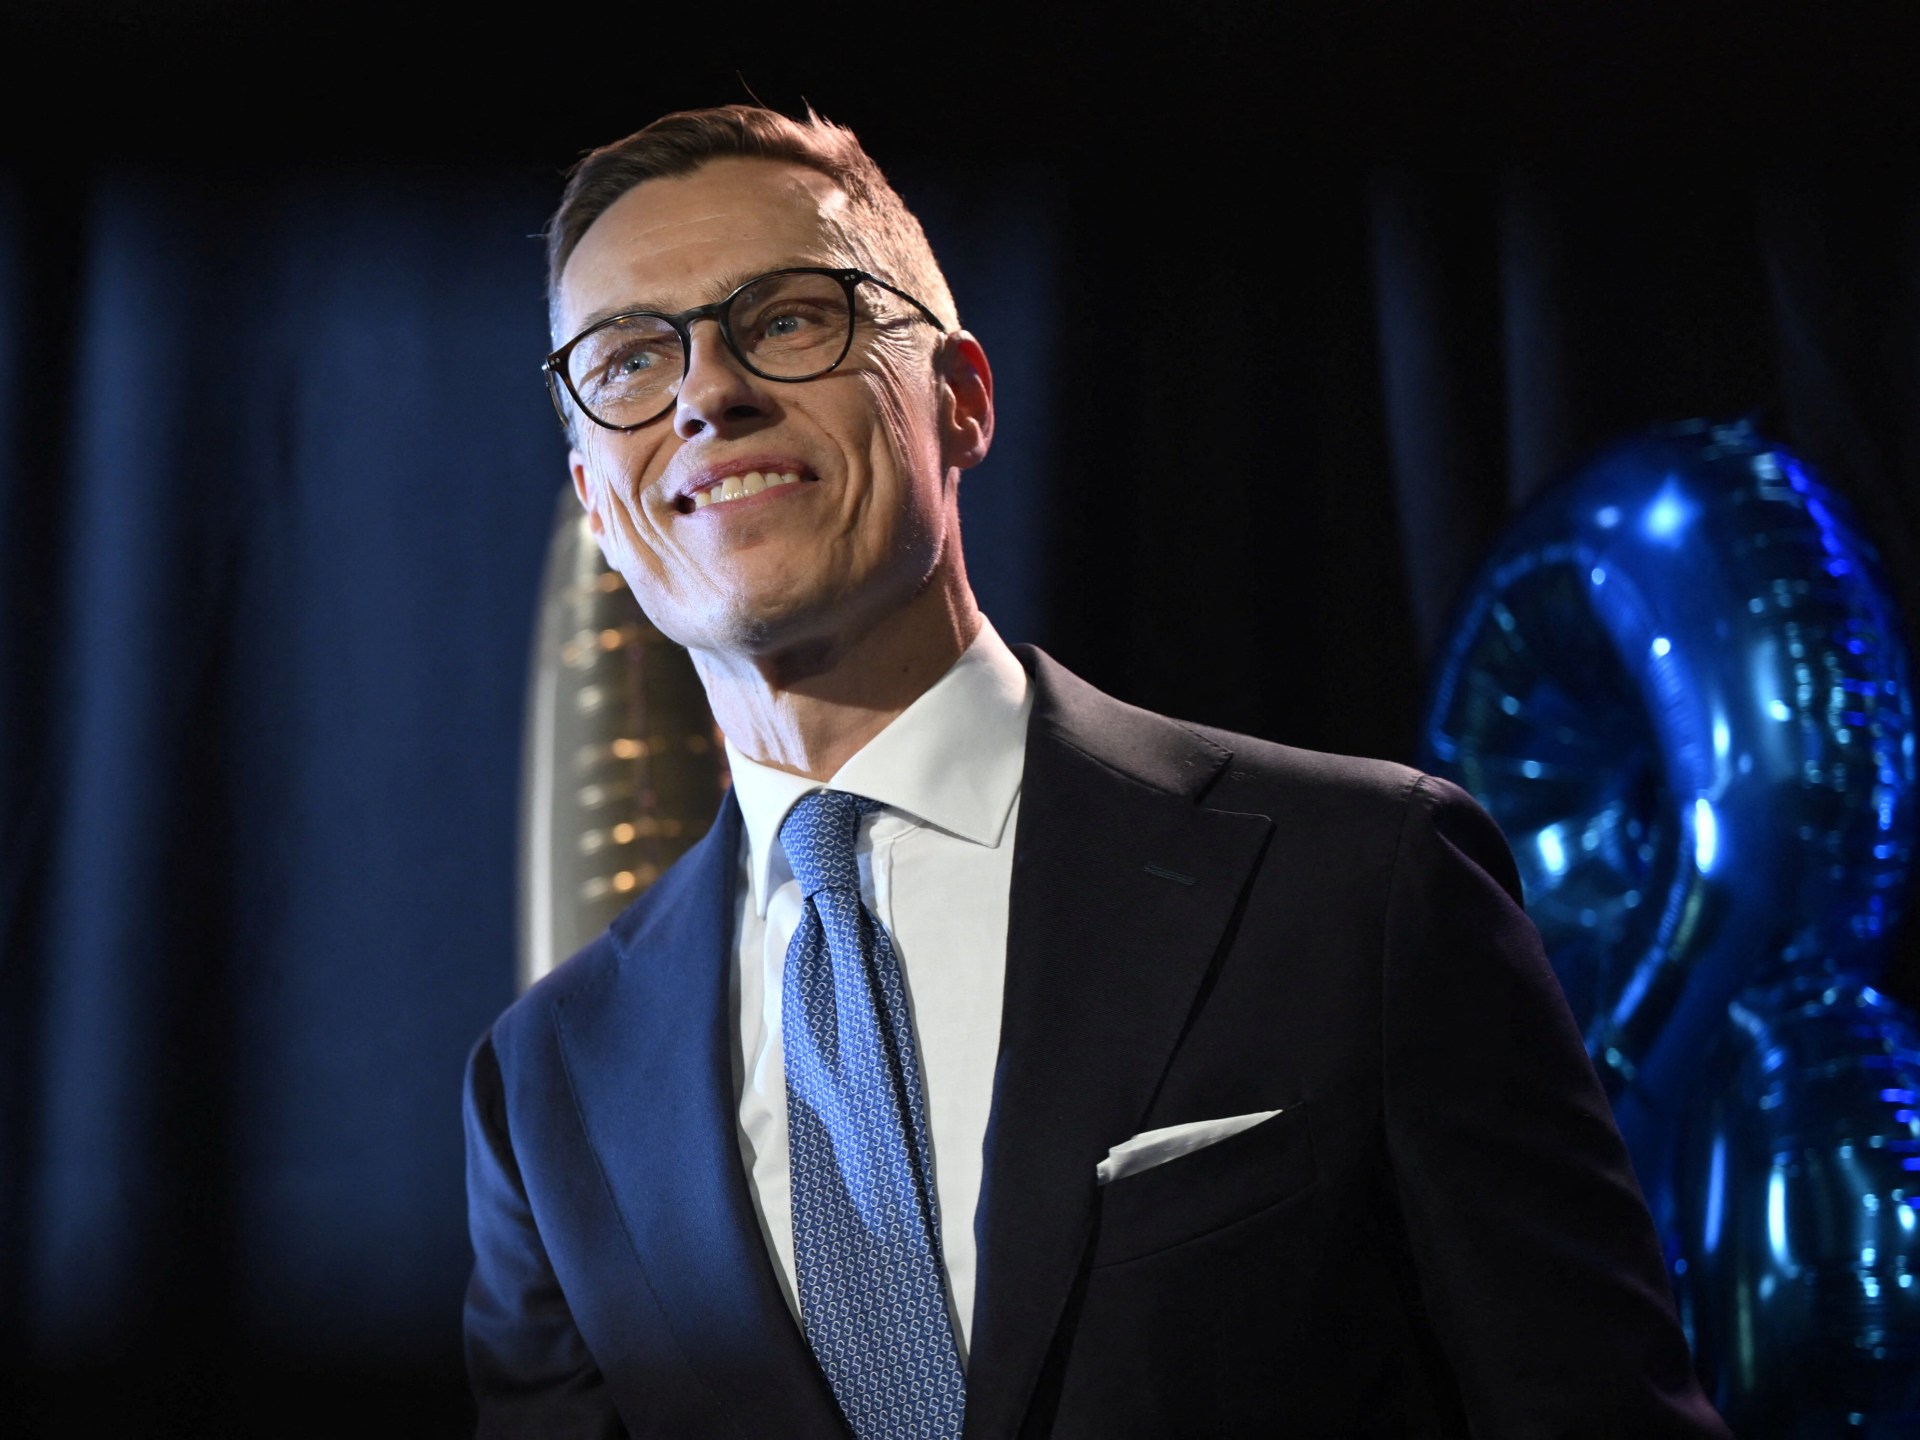 Centre-right Stubb leads Finland’s presidential vote in early results | Elections News